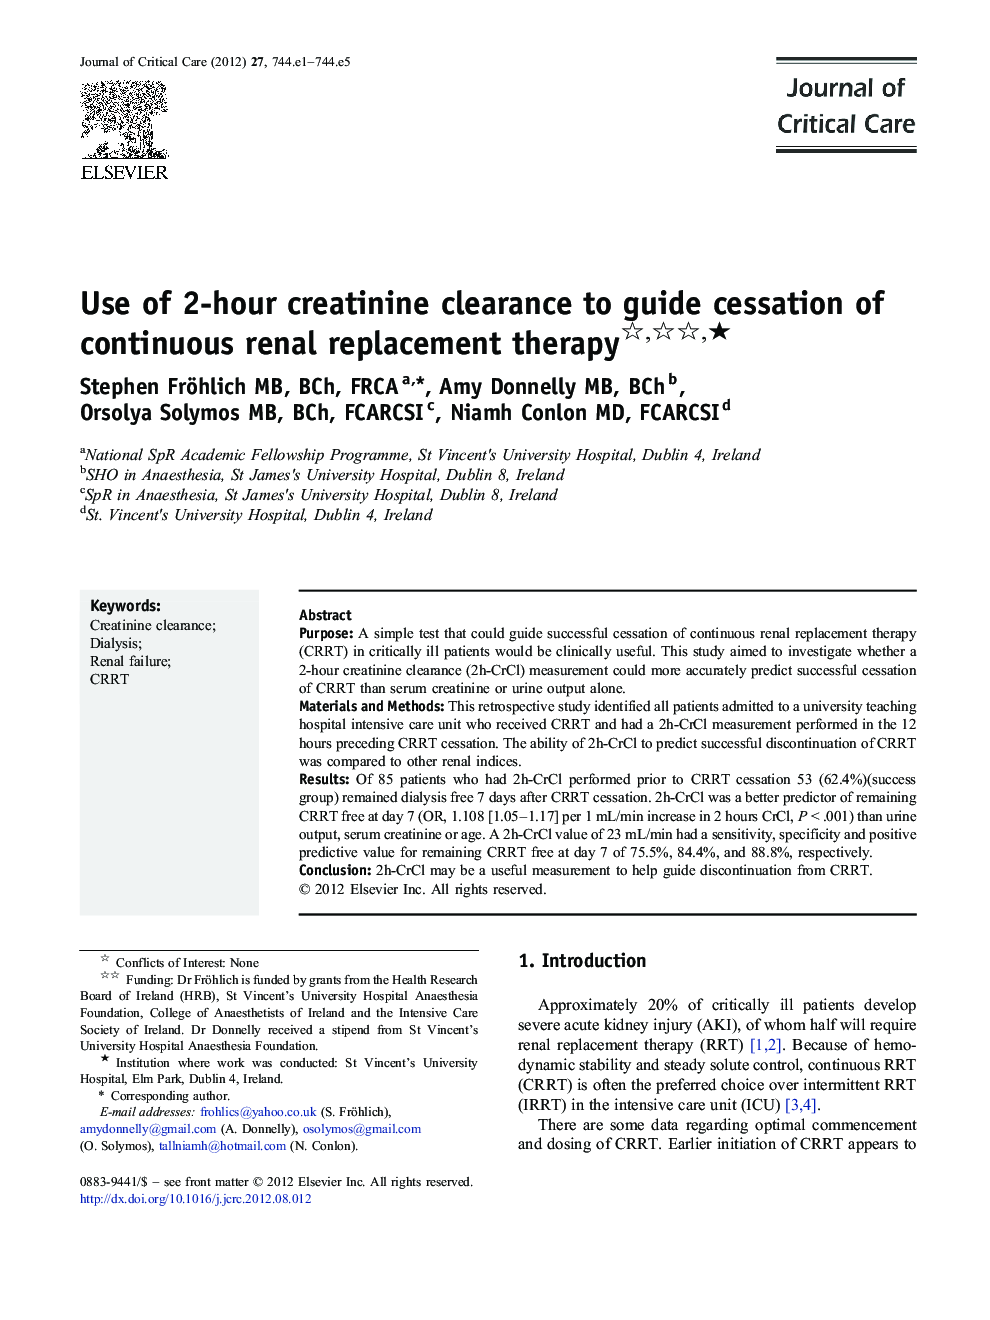 Use of 2-hour creatinine clearance to guide cessation of continuous renal replacement therapyâ